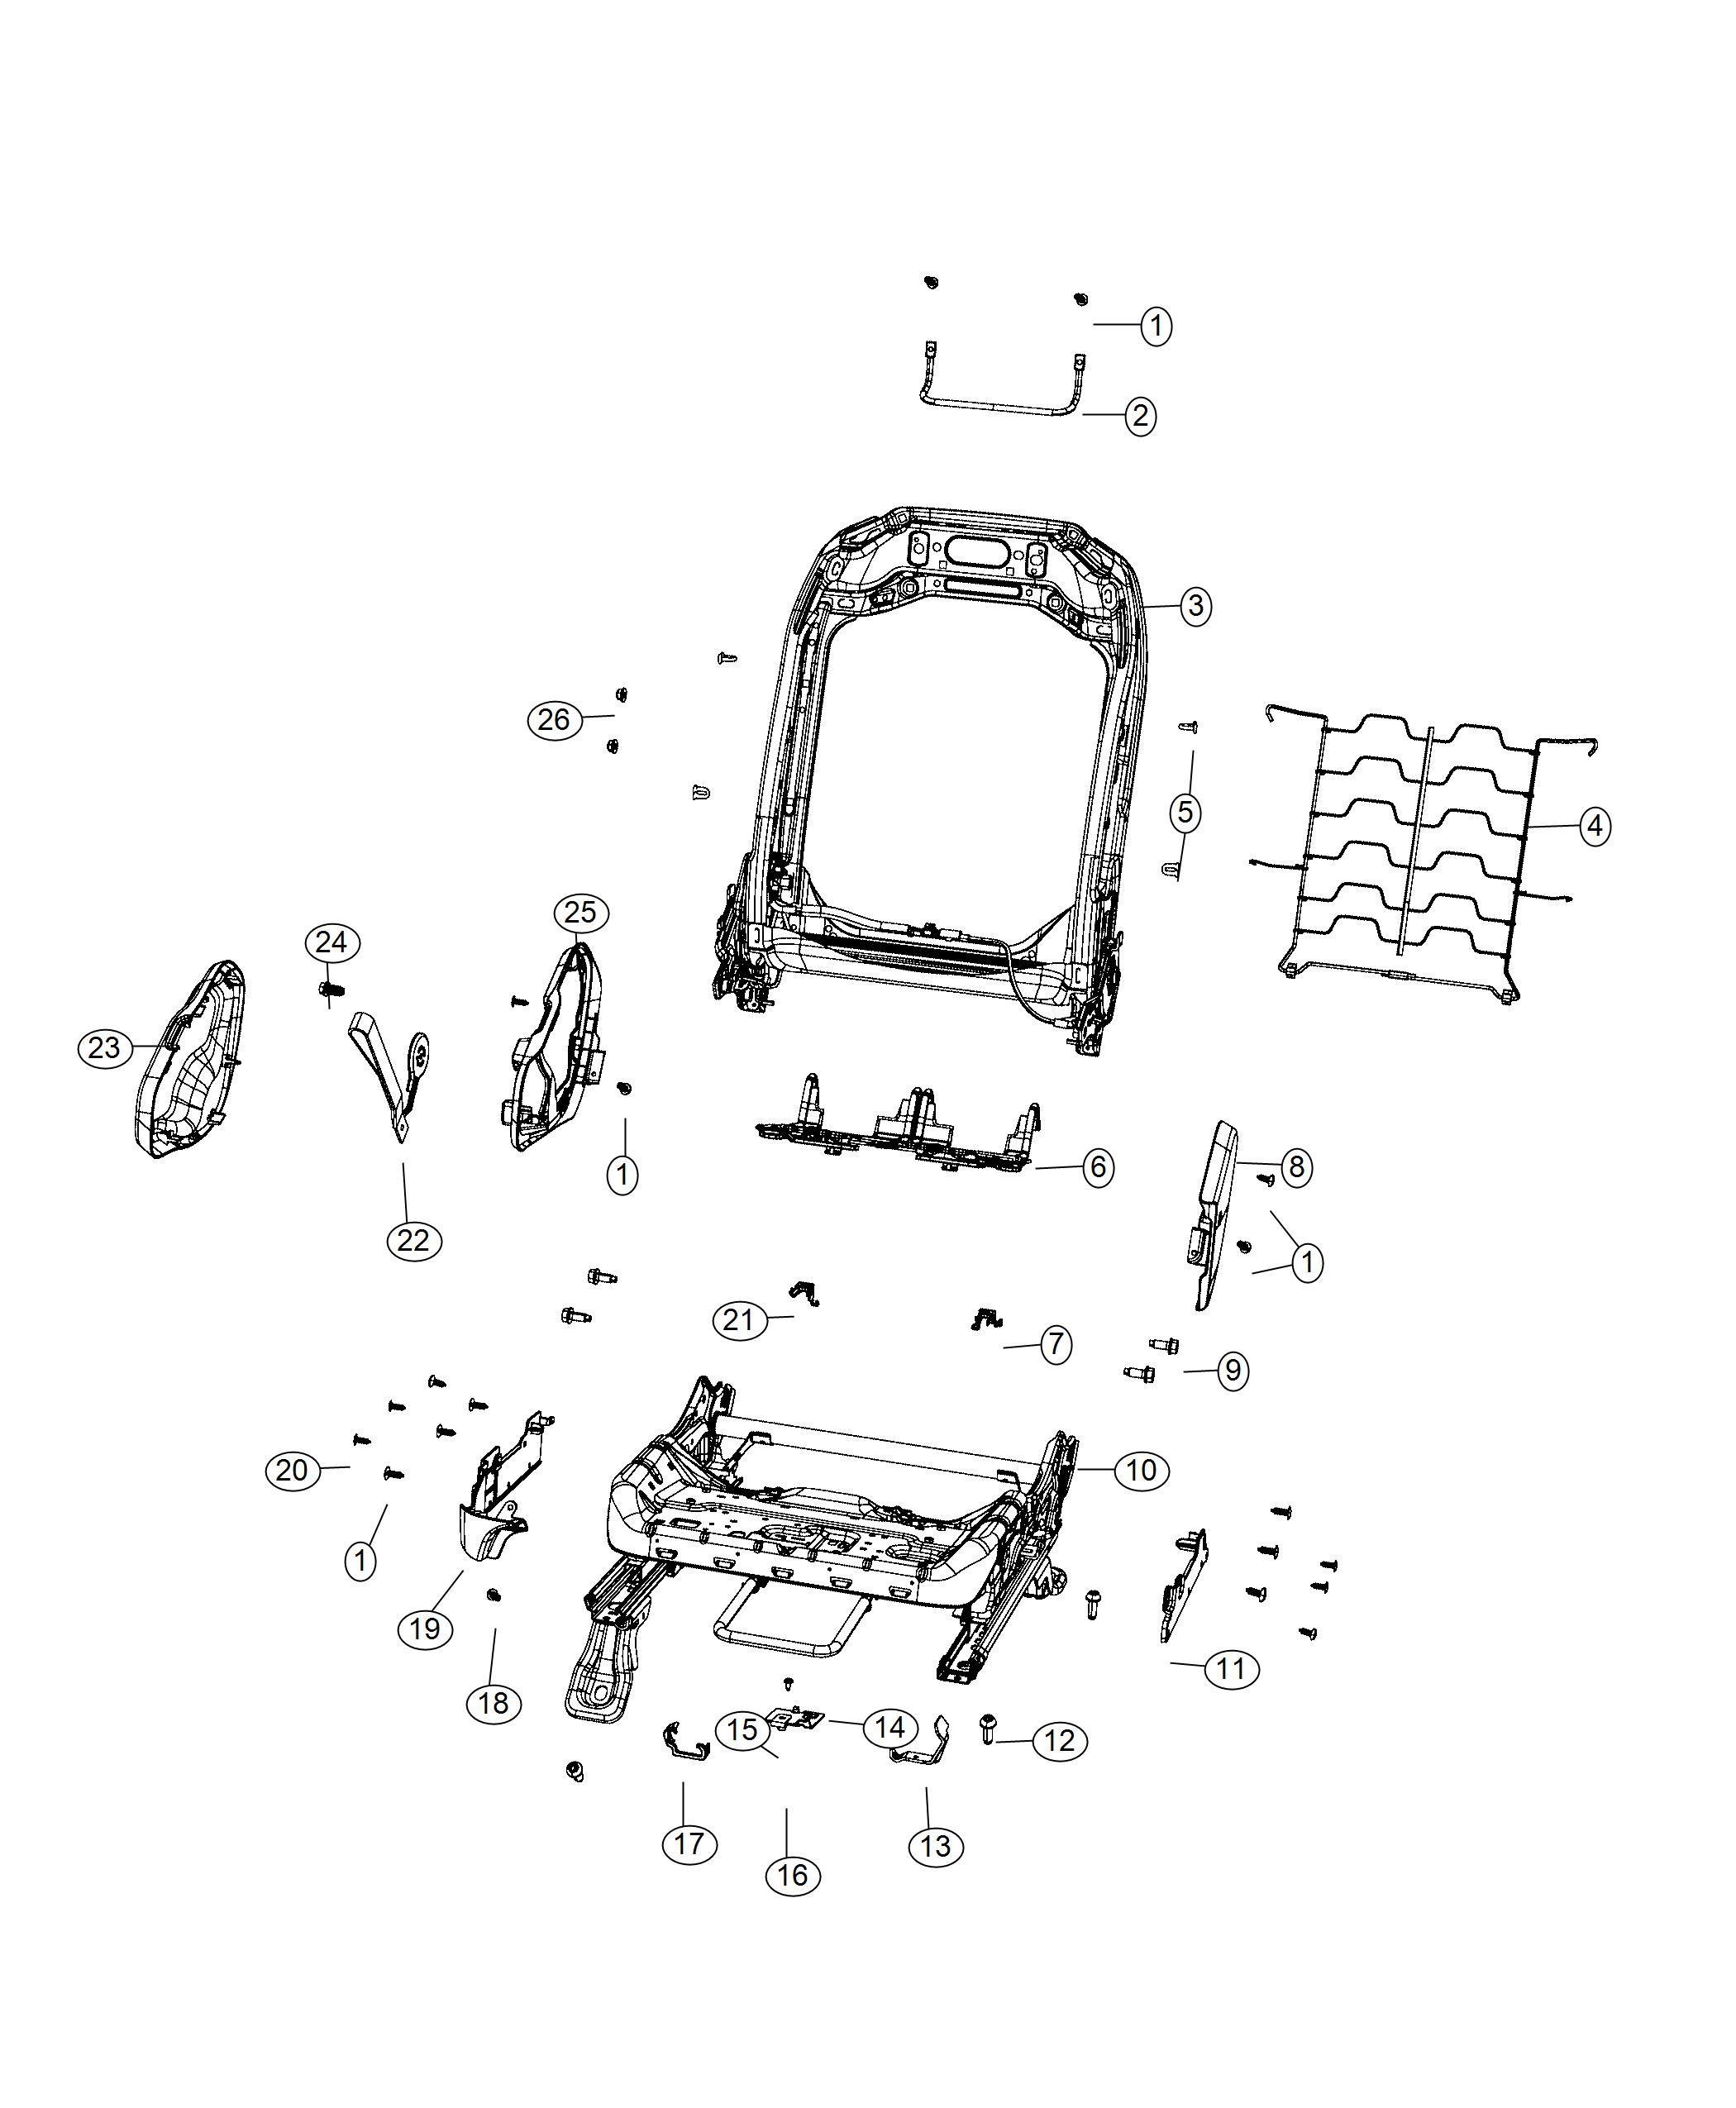 Diagram Adjusters, Recliners, Shields and Risers - Passenger Seat - 74 Body. for your Jeep Wrangler  